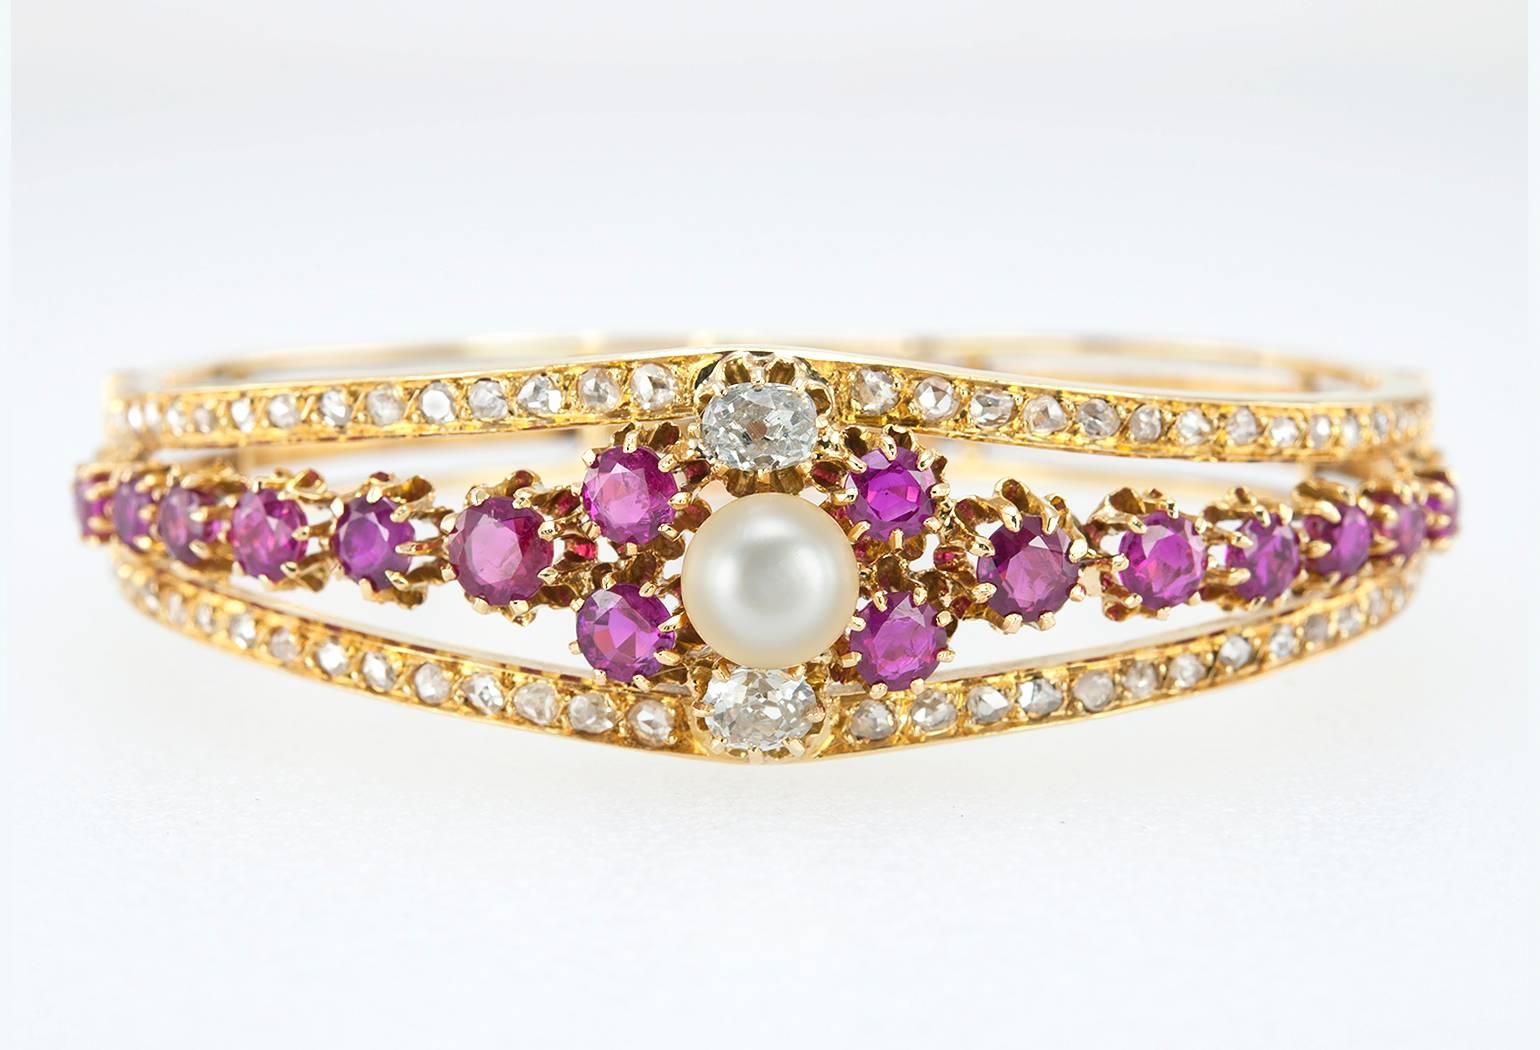 A Victorian 18 karat yellow gold bangle bracelet from circa 1880s-1890s.  This beautiful bracelet features 16 natural rubies that have an intense, gorgeous color along with a pearl set at the center and flanked by 2 old cushion cut diamonds. 